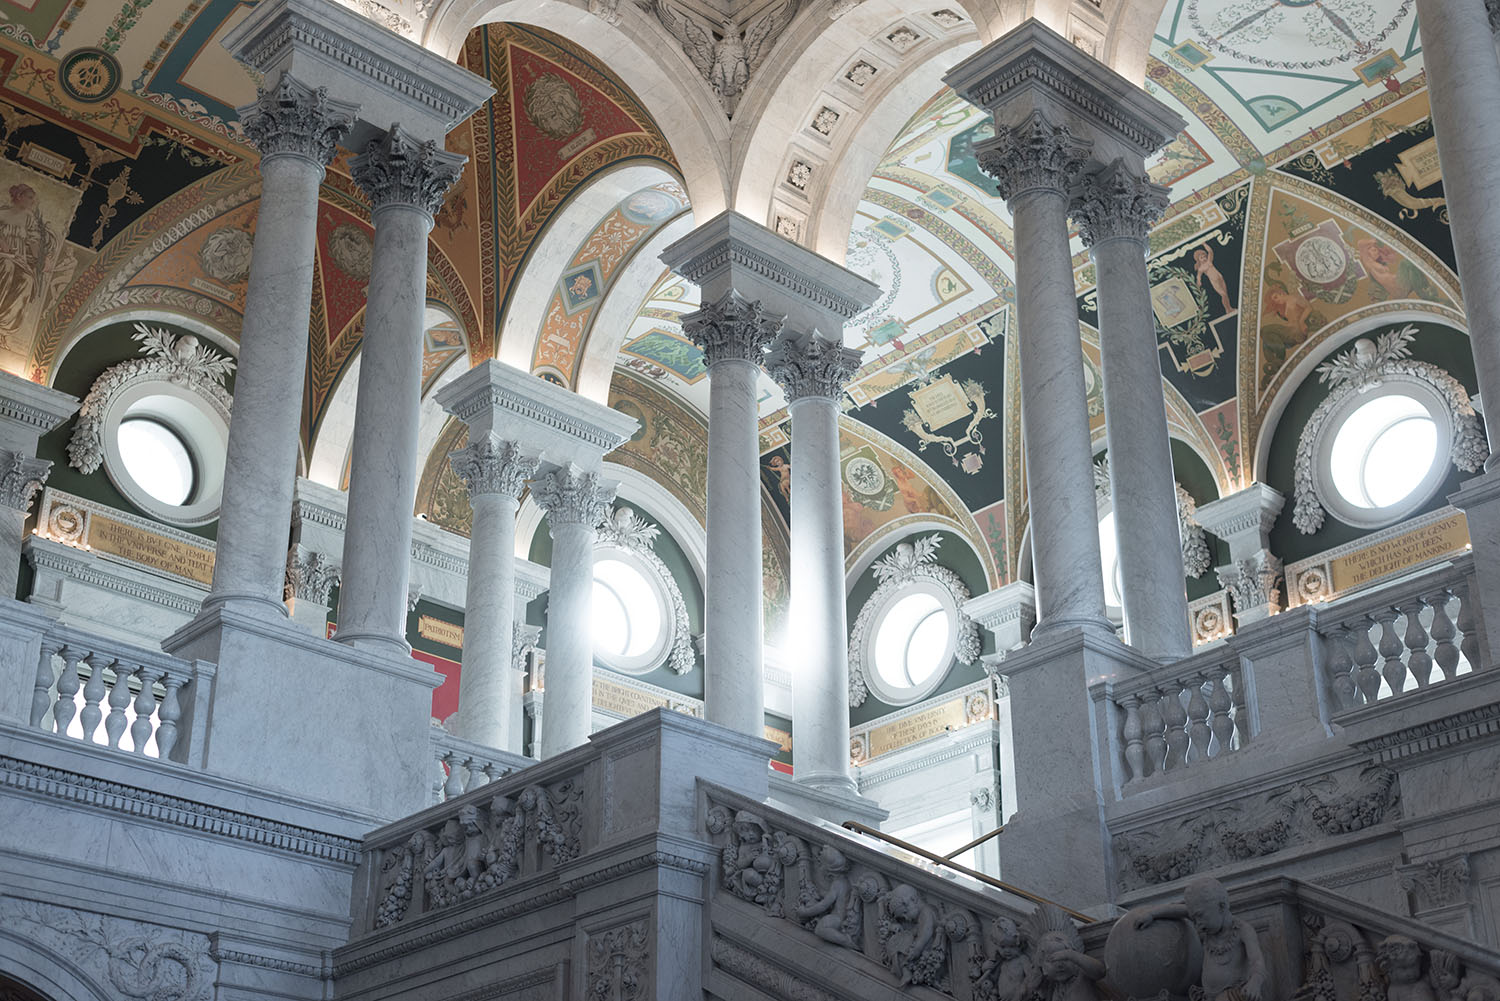 Marble columns in the Library of Congress in Washington DC, as captured by top travel blogger Cee Fardoe of Coco & Vera